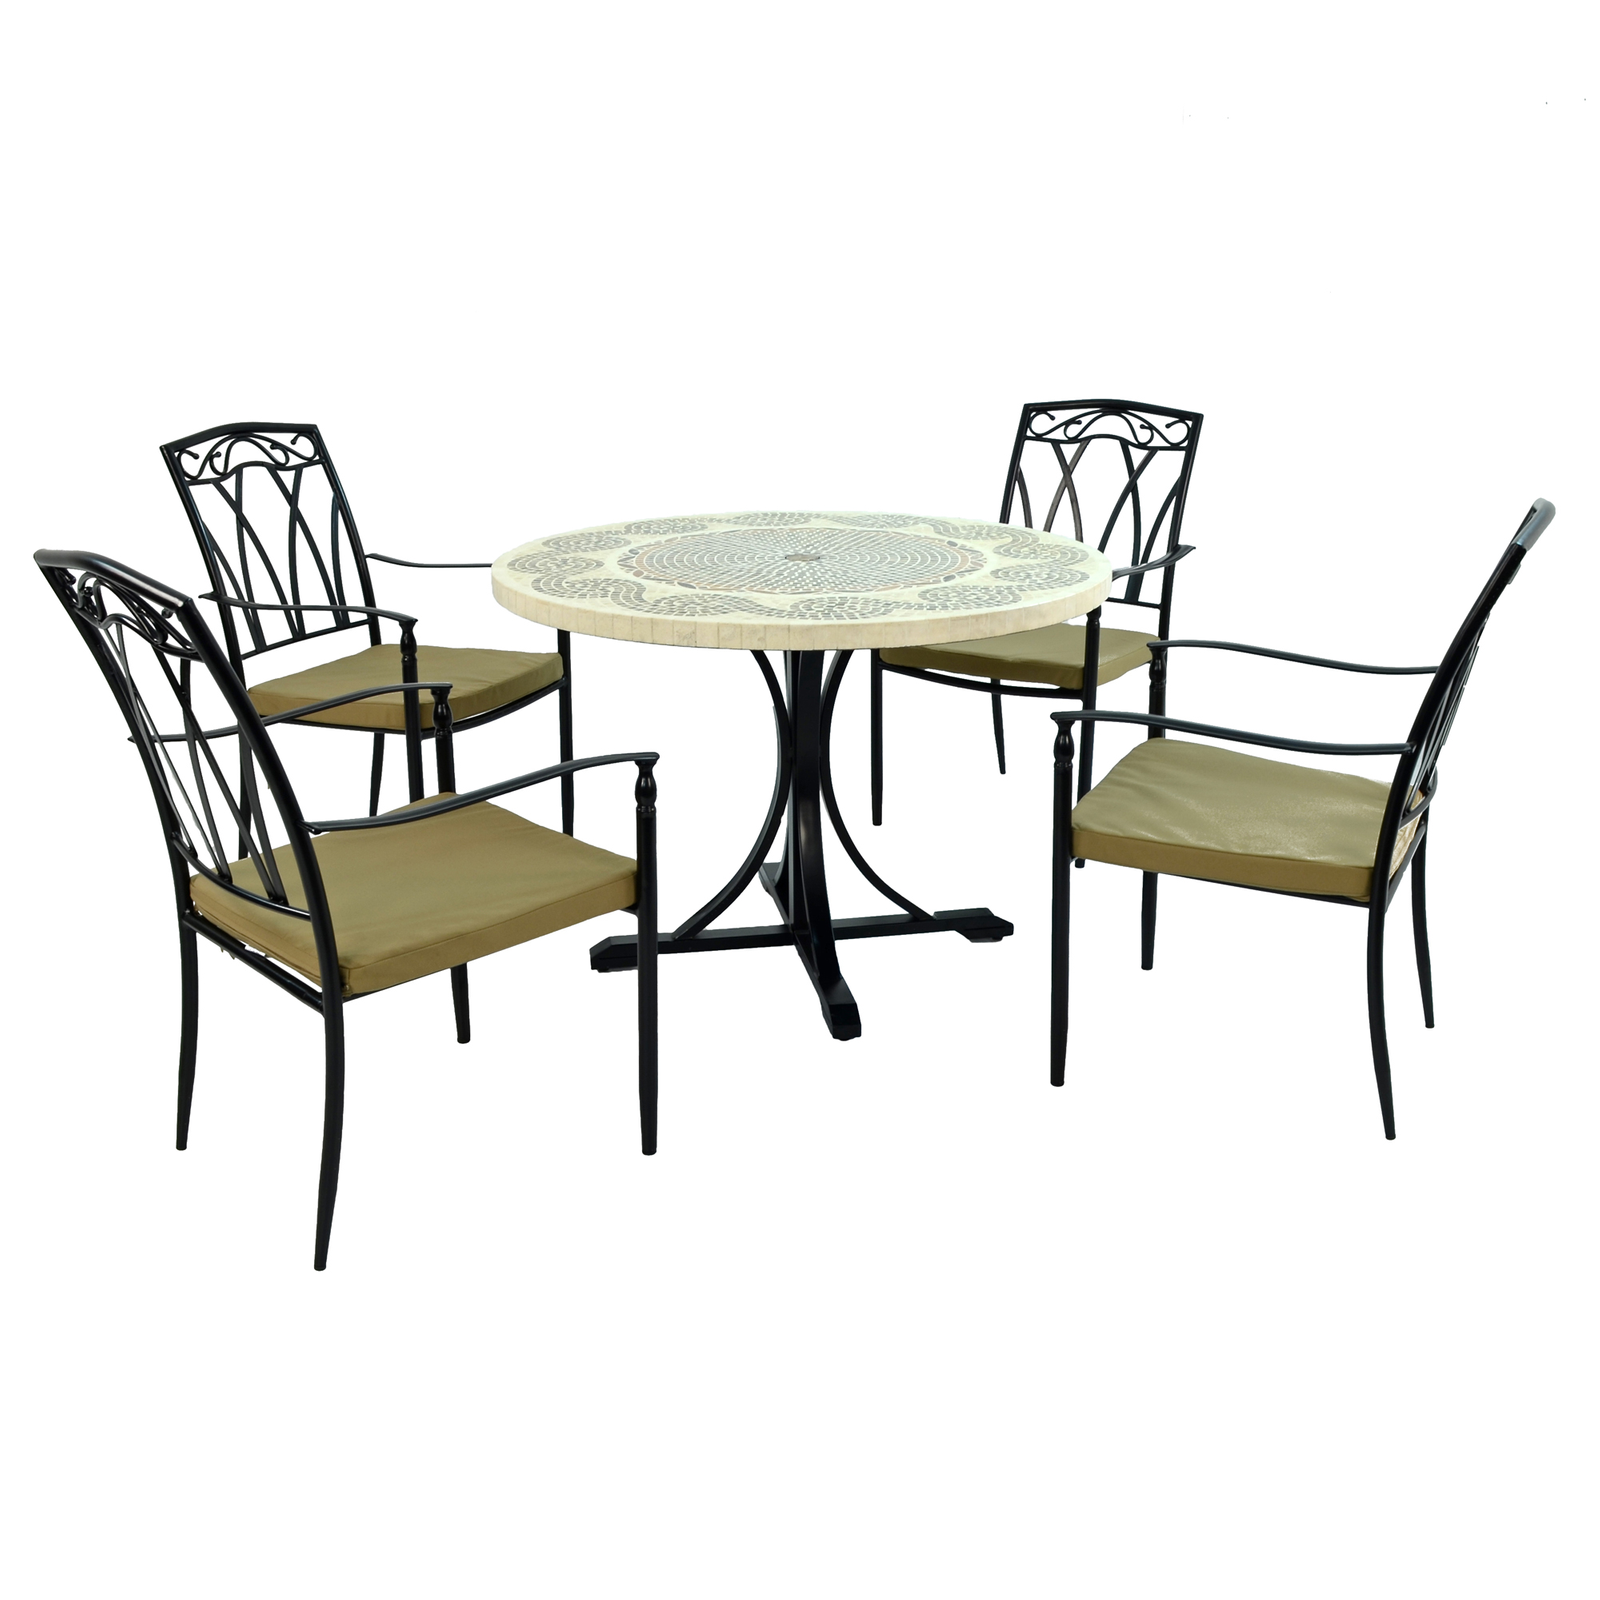 Byron Manor Avignon Stone Mosaic Garden Dining Table with 4 Ascot Chairs Dining Sets Byron Manor Default Title  